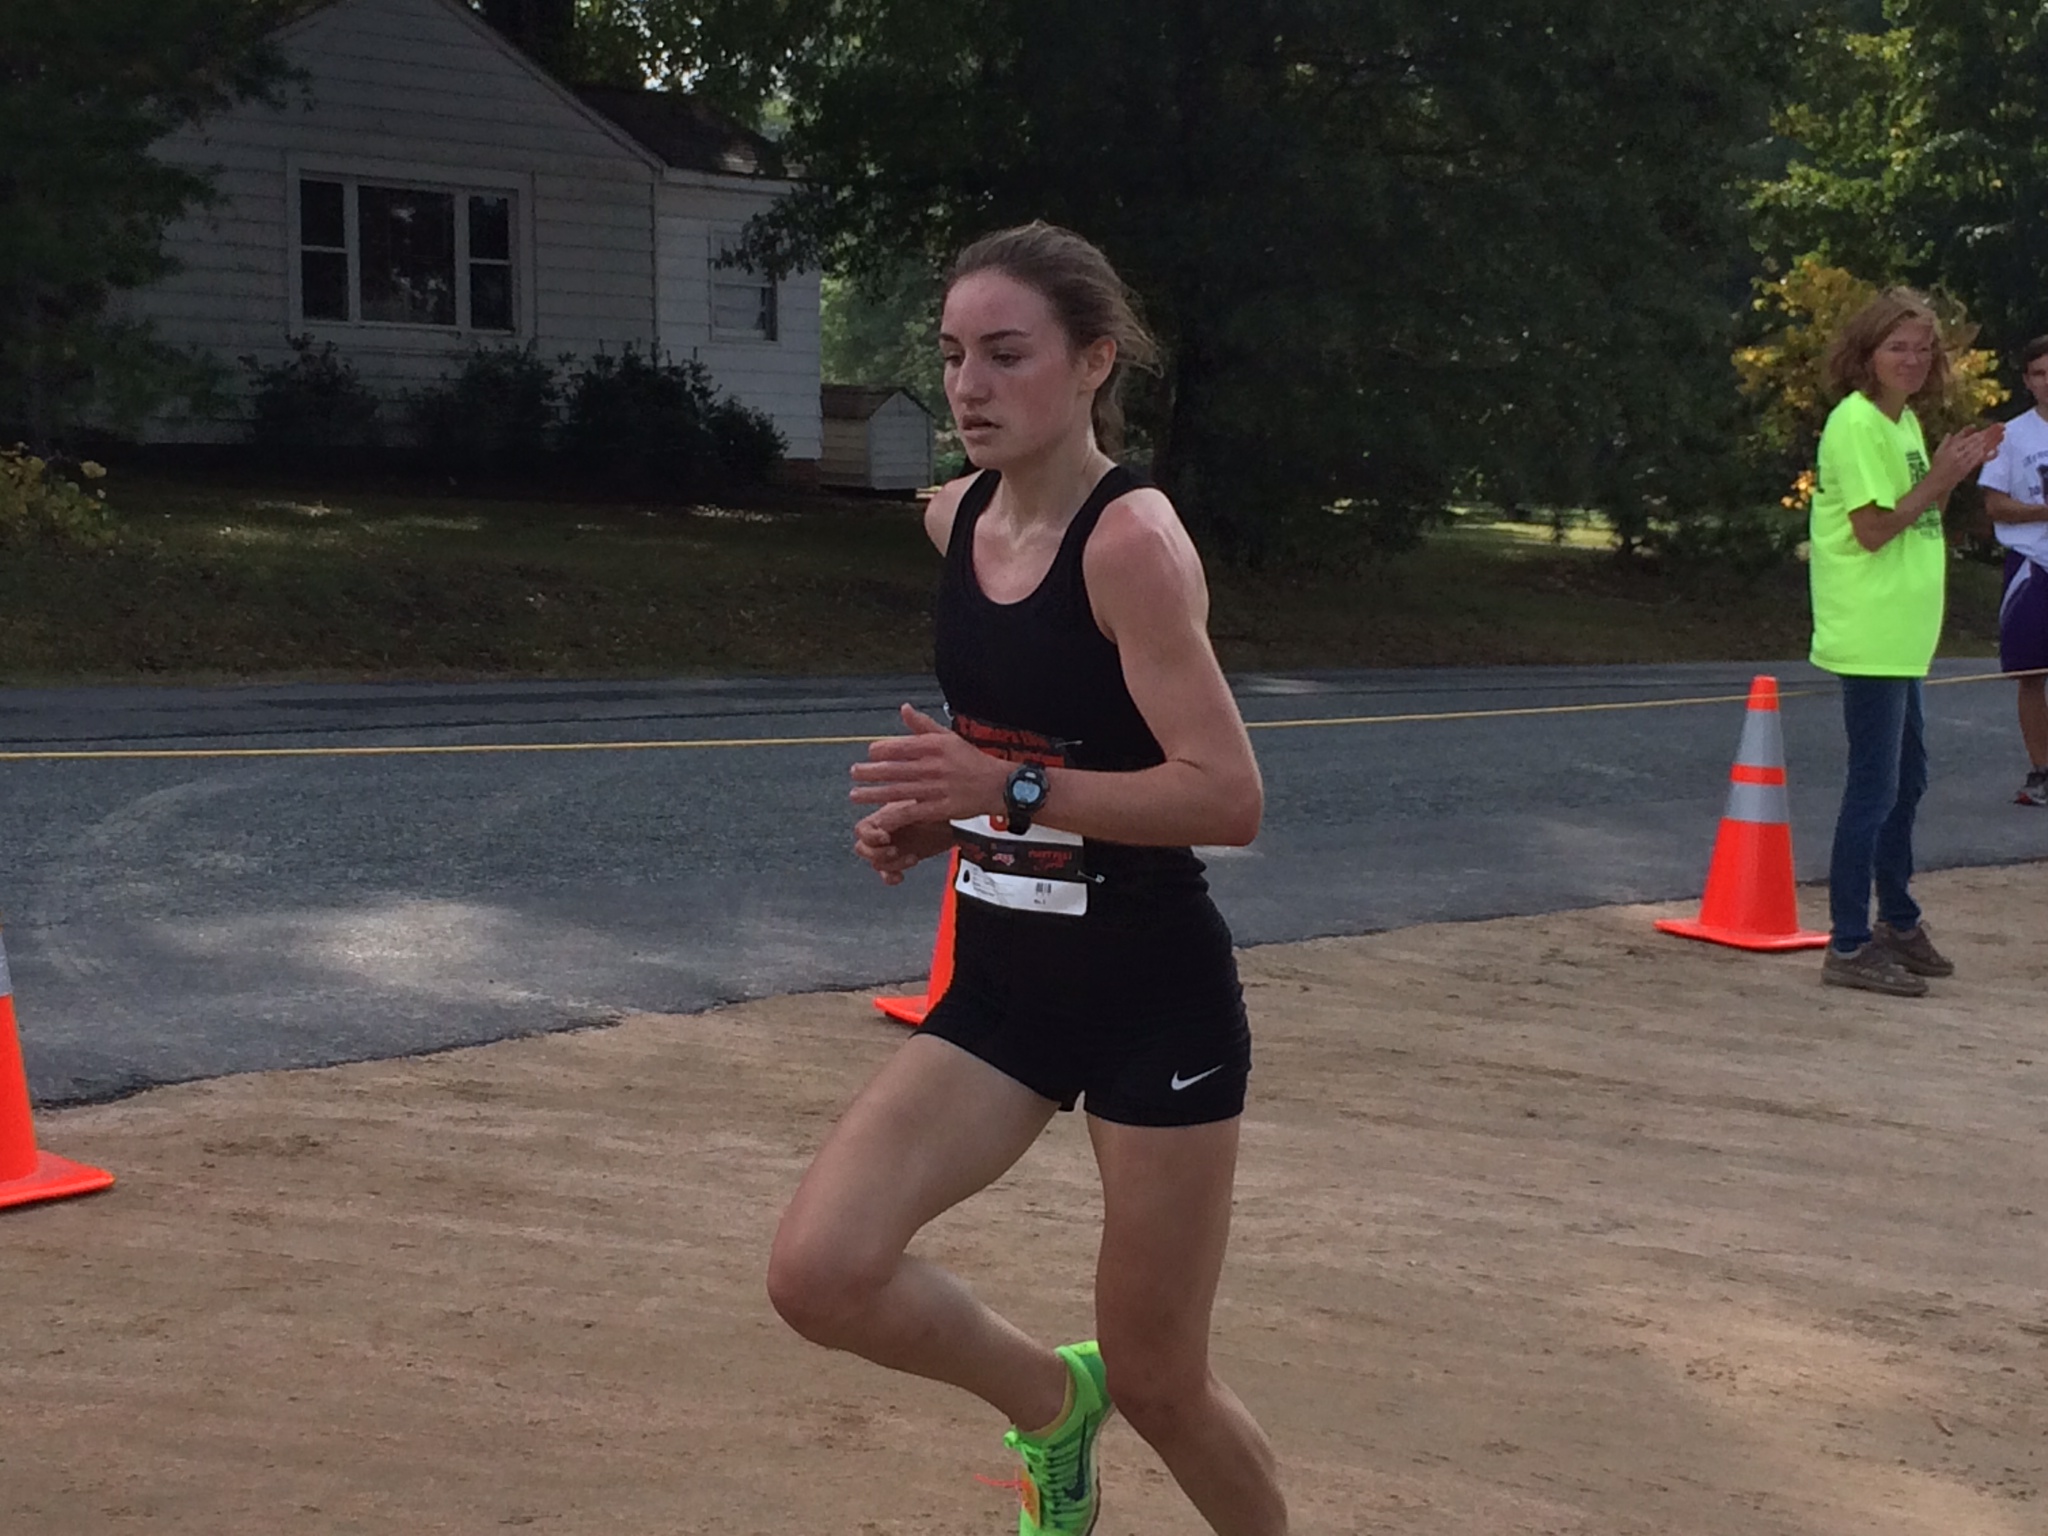 Ravenscroft School (Raleigh, N.C.) senior Ryen Frazier will contend for the girl’s national title in her first appearance at the Foot Locker Cross Country Championship finals on Dec. 13. | Photo courtesy of Tammy Palmer